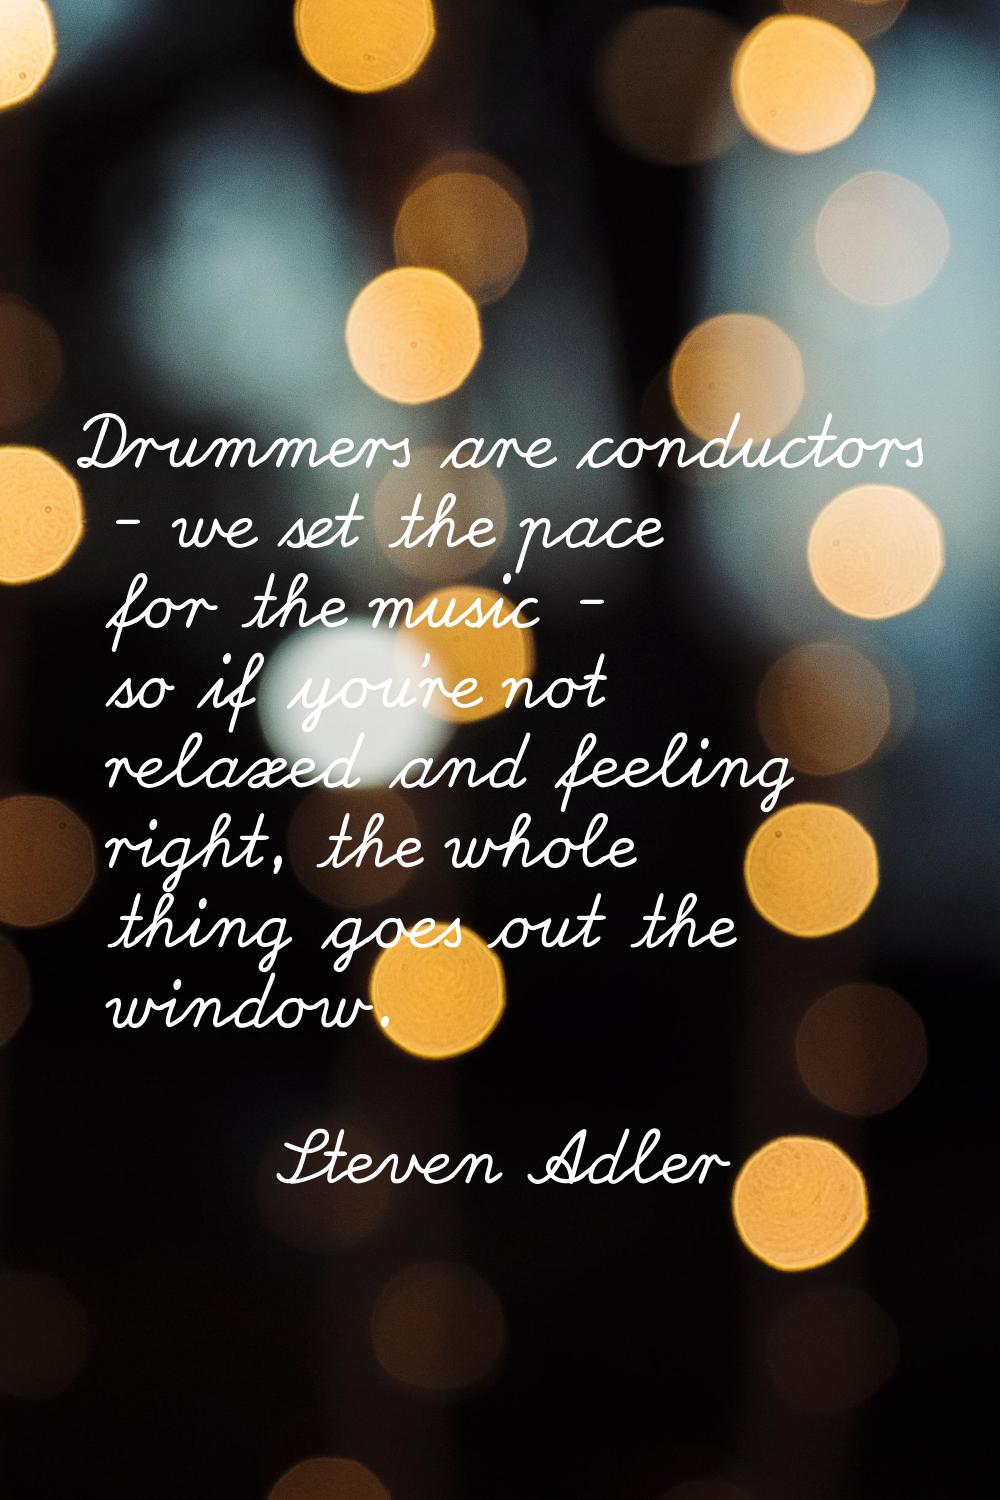 Drummers are conductors - we set the pace for the music - so if you're not relaxed and feeling righ